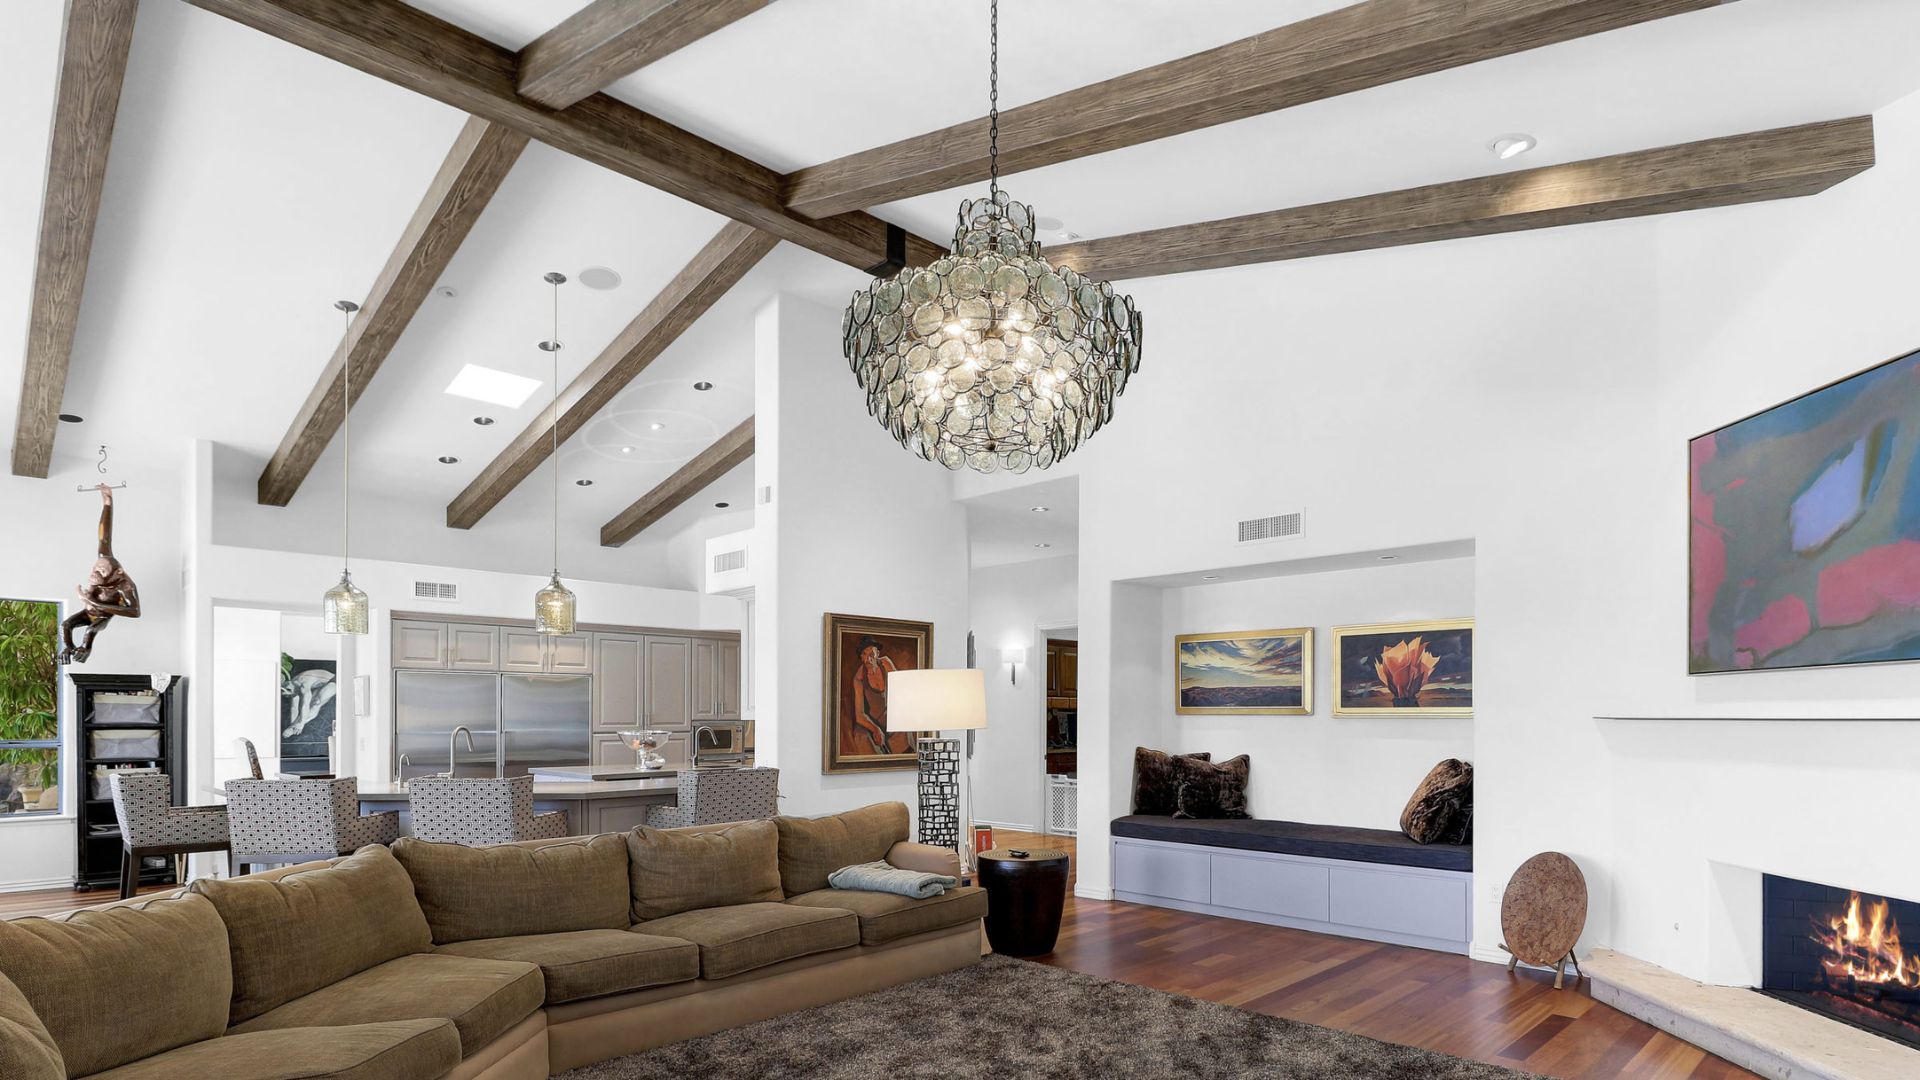 Save a Tree: Alternatives to Wood Beams on Ceilings